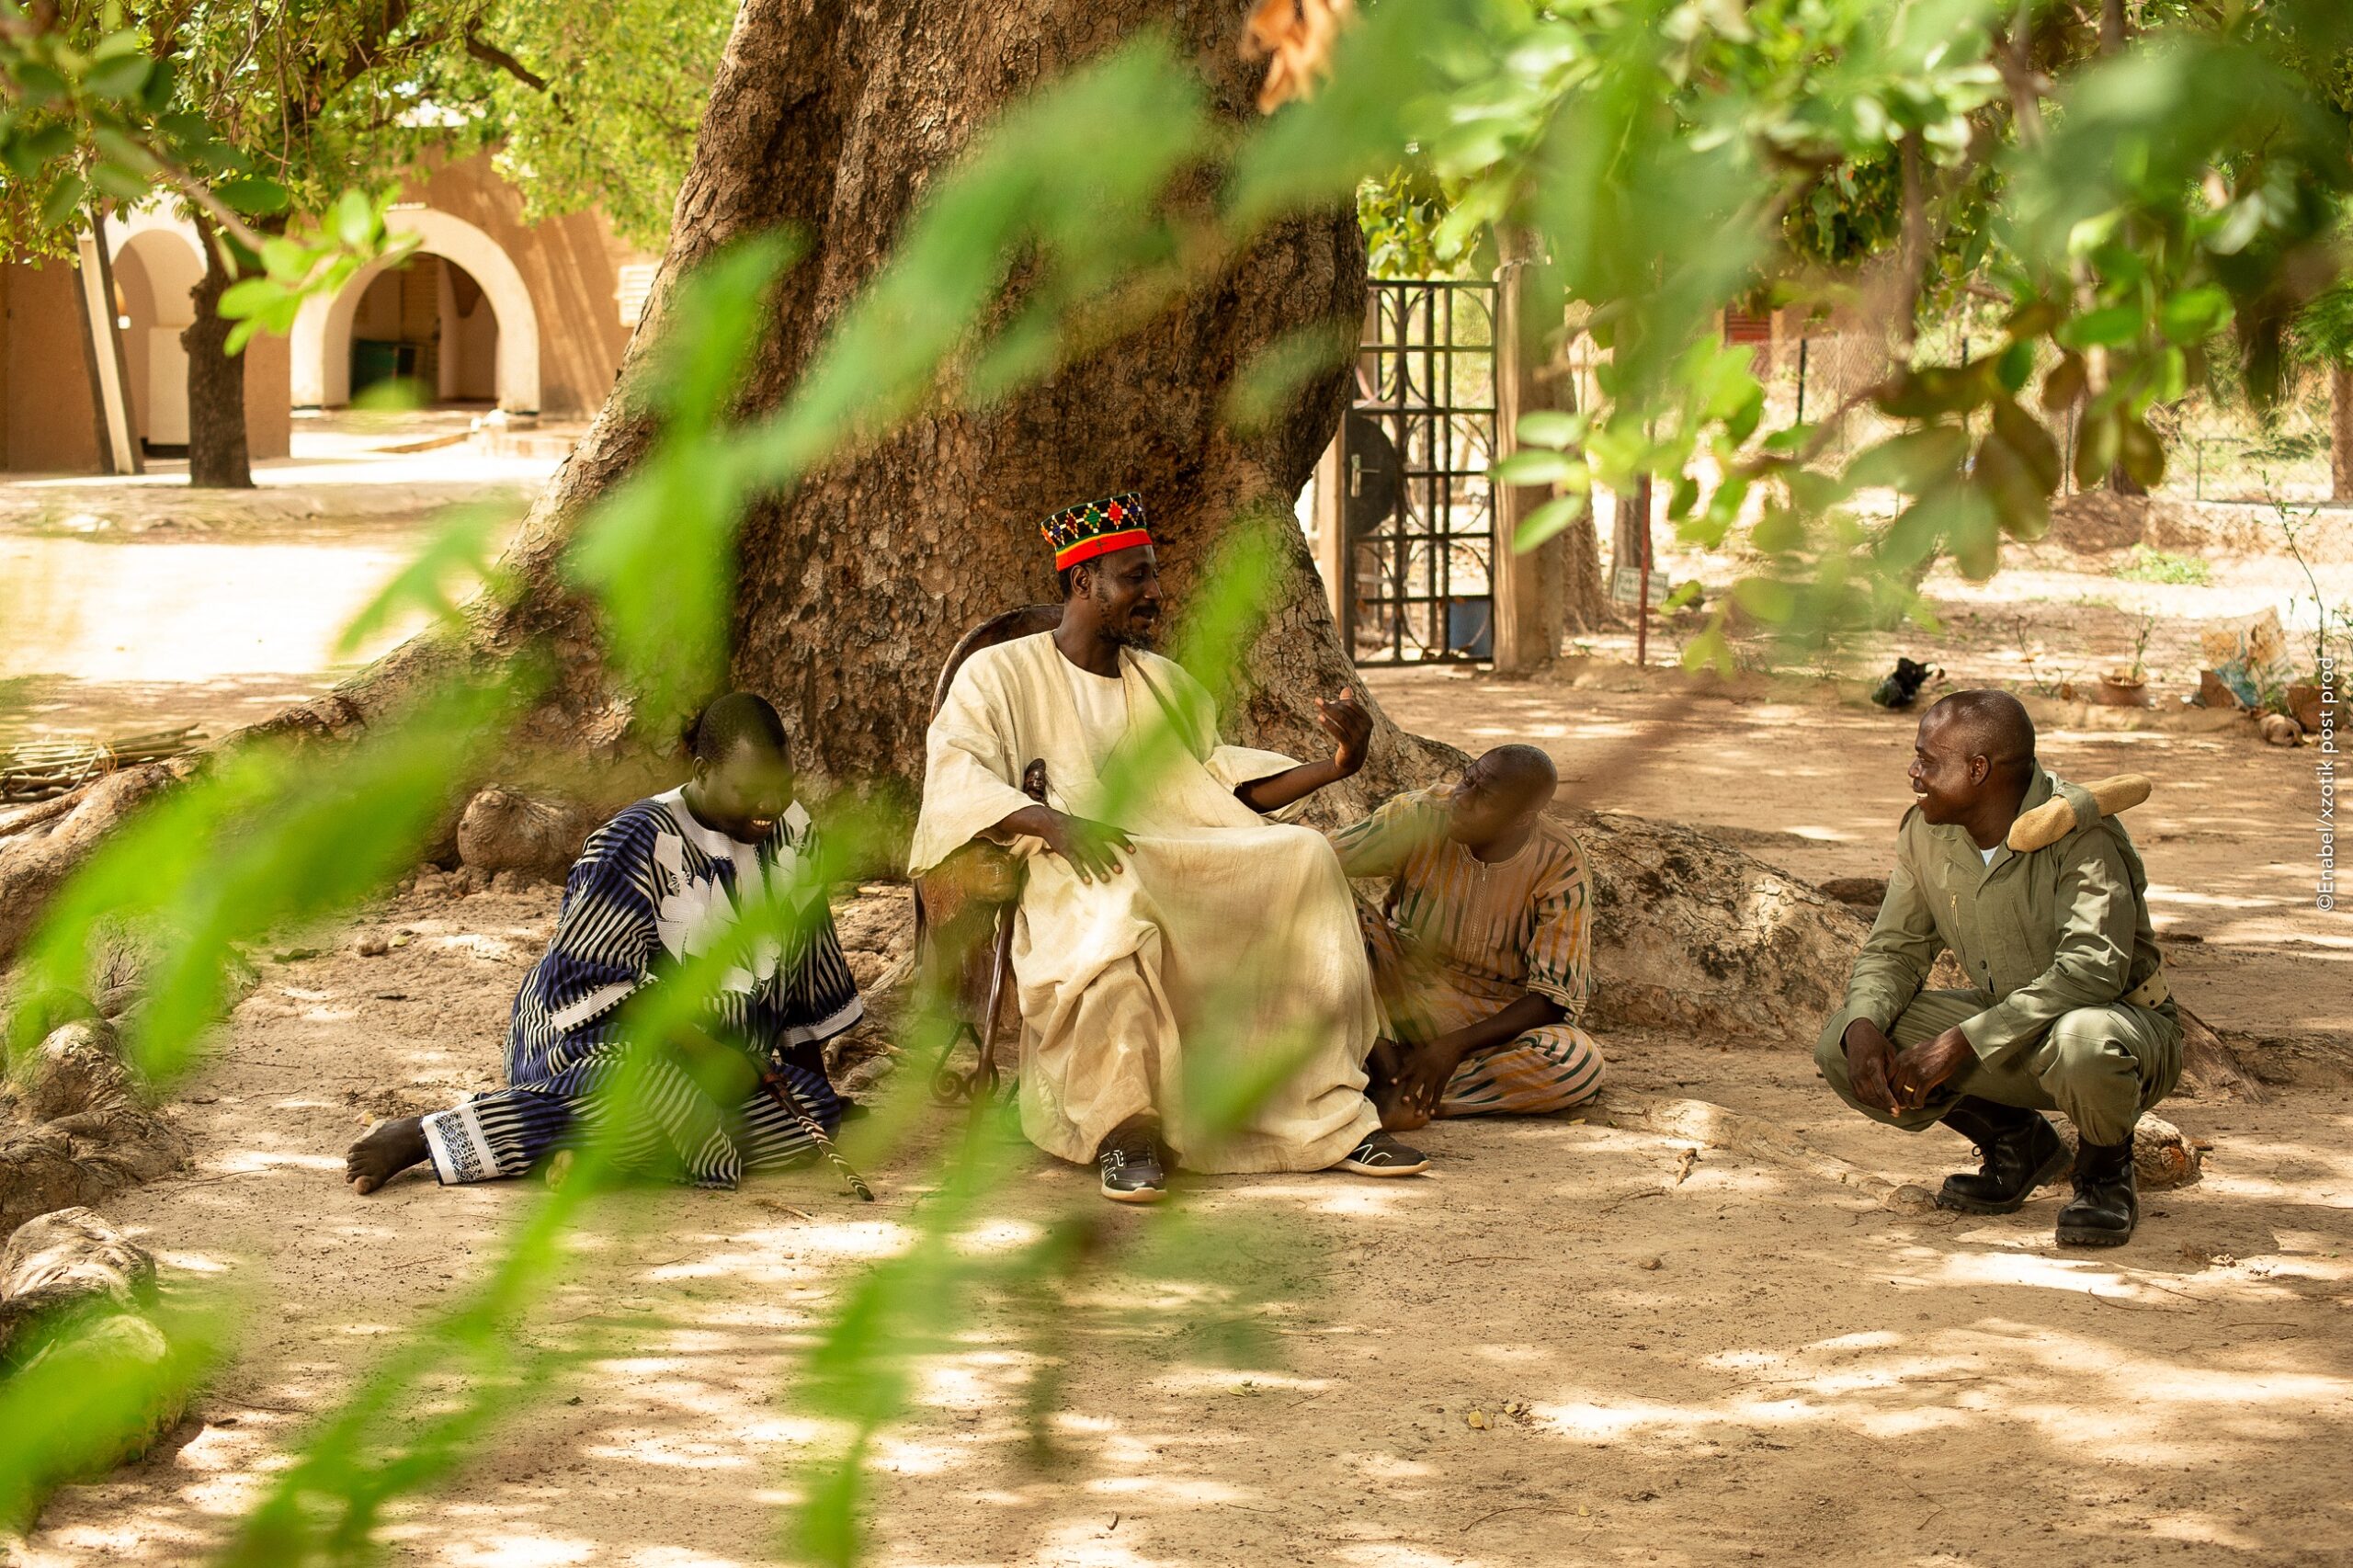 burkinabe policeman talking with a civilian